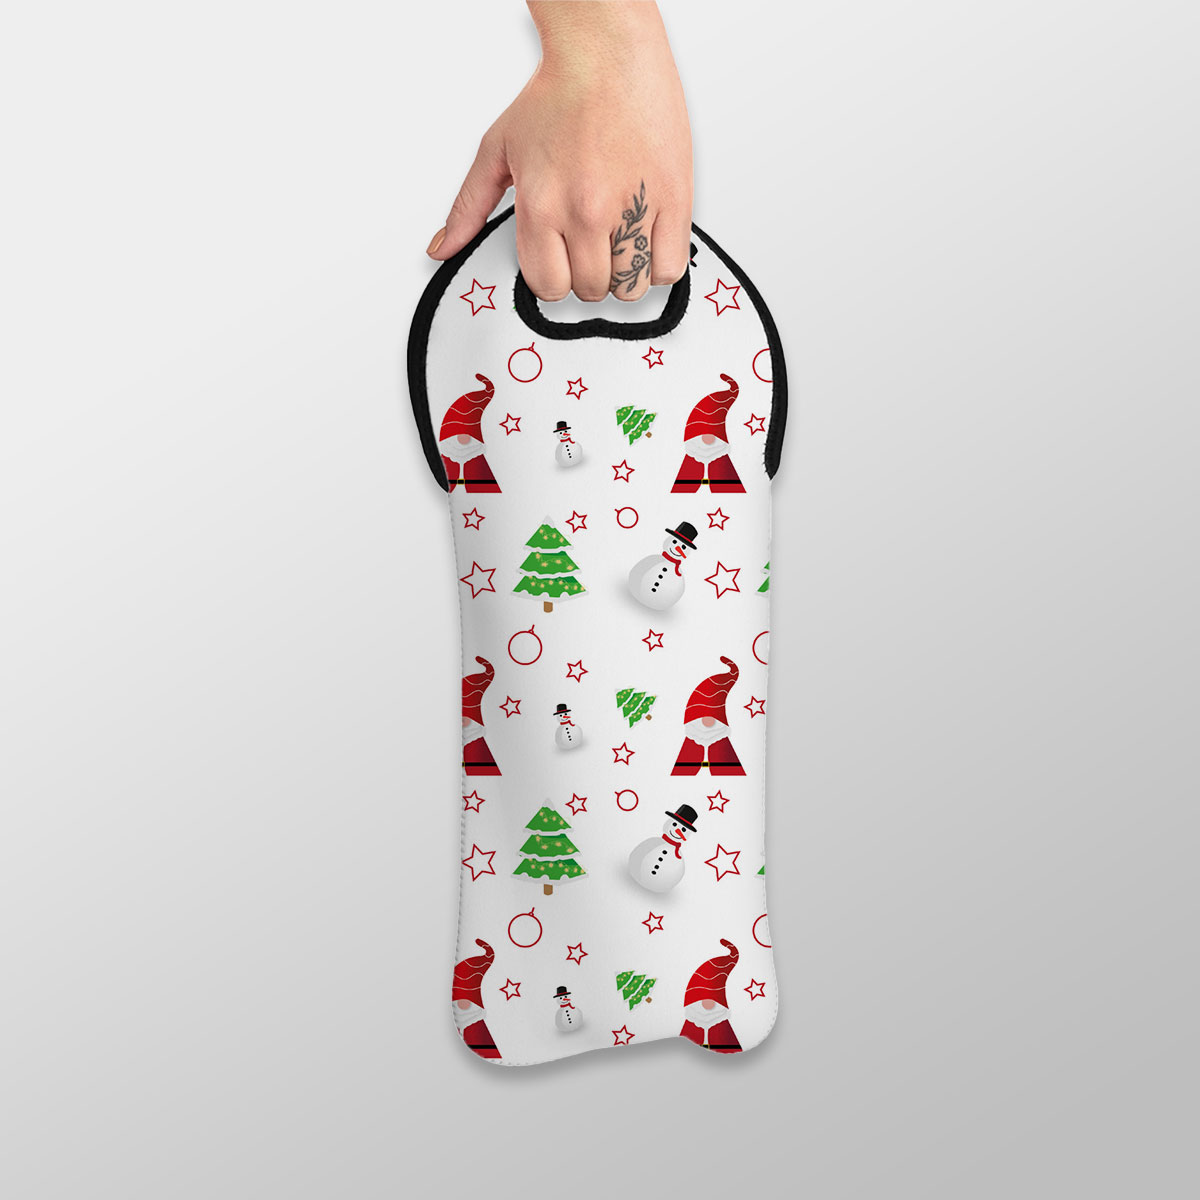 Santa Claus, Snowman Clipart And Pine Tree Silhouette Seamless Pattern Wine Tote Bag